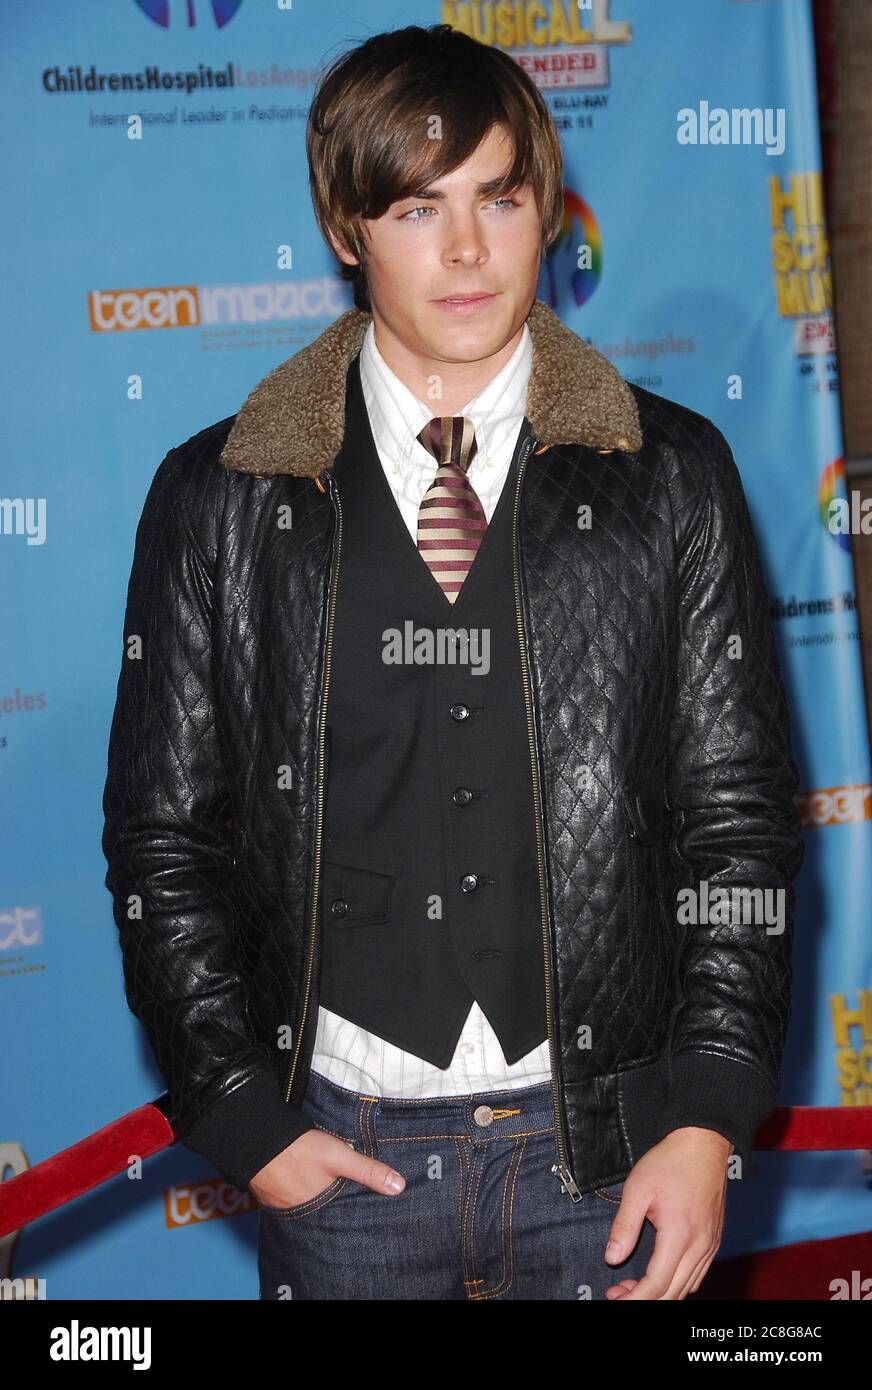 Zac Efron at the High School Musical 2: Extended Edition DVD Release Premiere held at the El Capitan Theatre in Hollywood, CA. The event took place on Monday, November 19, 2007. Photo by: SBM / PictureLux - File Reference # 34006-11930SBMPLX Stock Photo